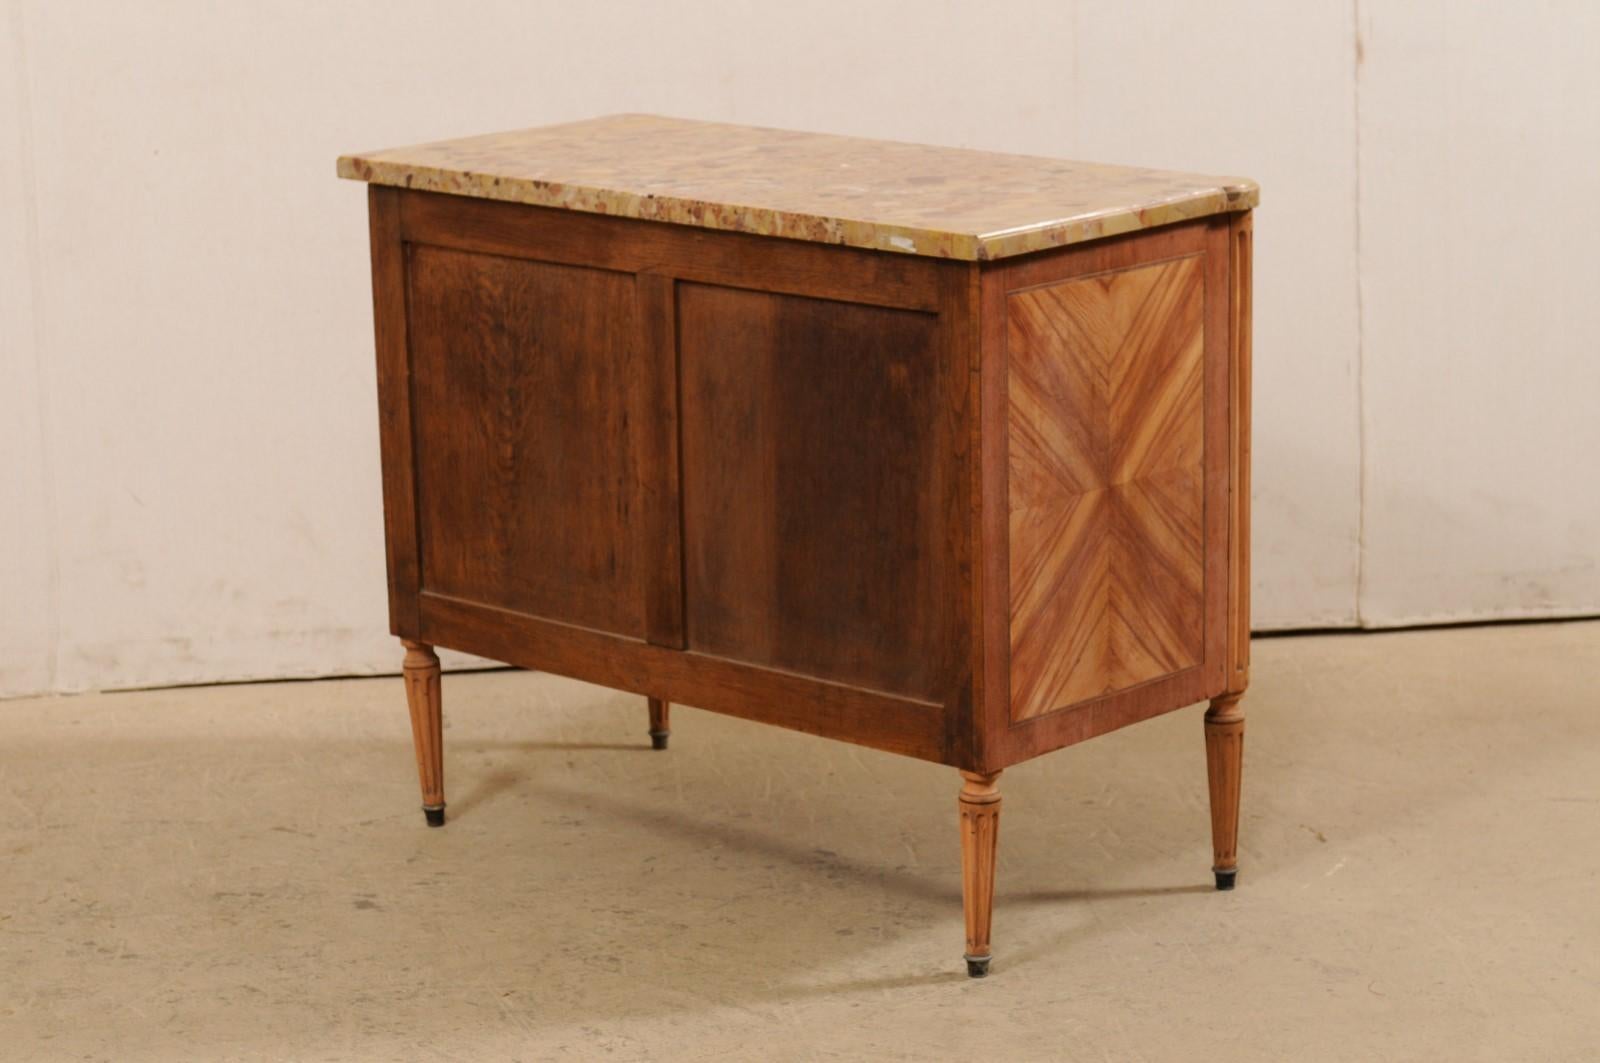 French Commode with Stone Top and Lovely Inlay Pattern Creating Visual Interest 5